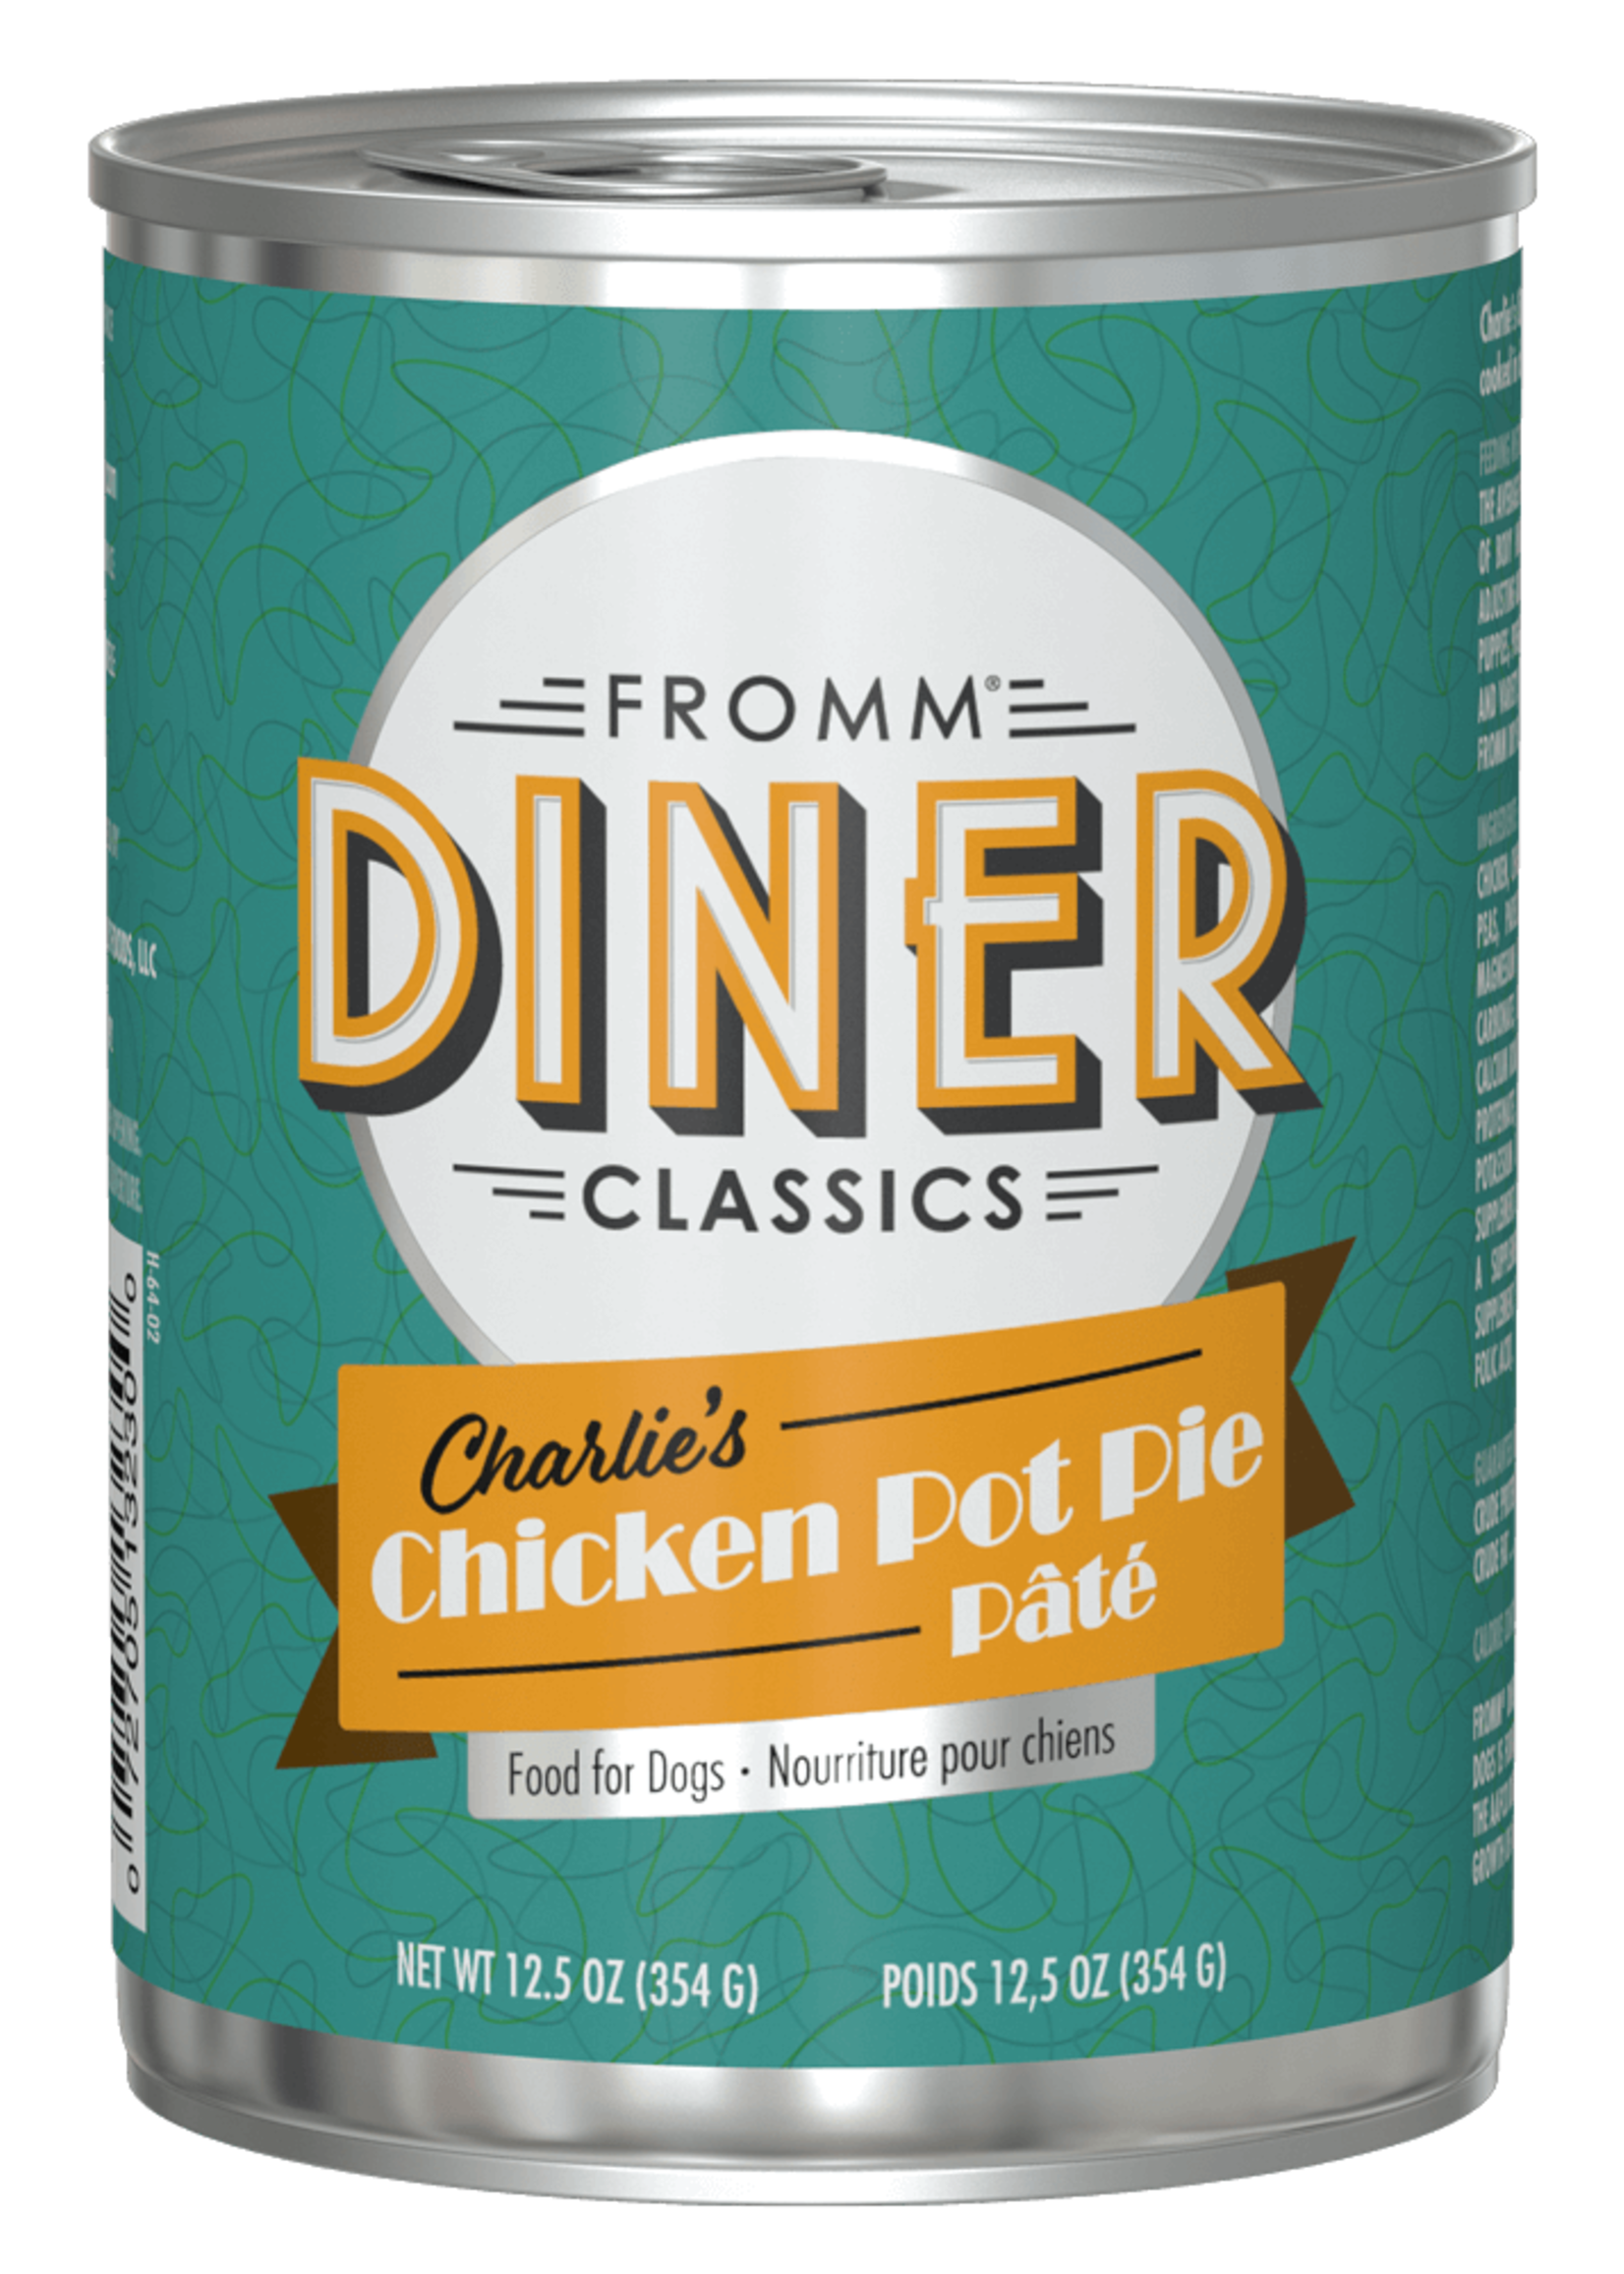 Fromm Family Pet Food Fromm Dog Diner classics Charlie's Chicken Pot Pie Pate 12/12.5 oz